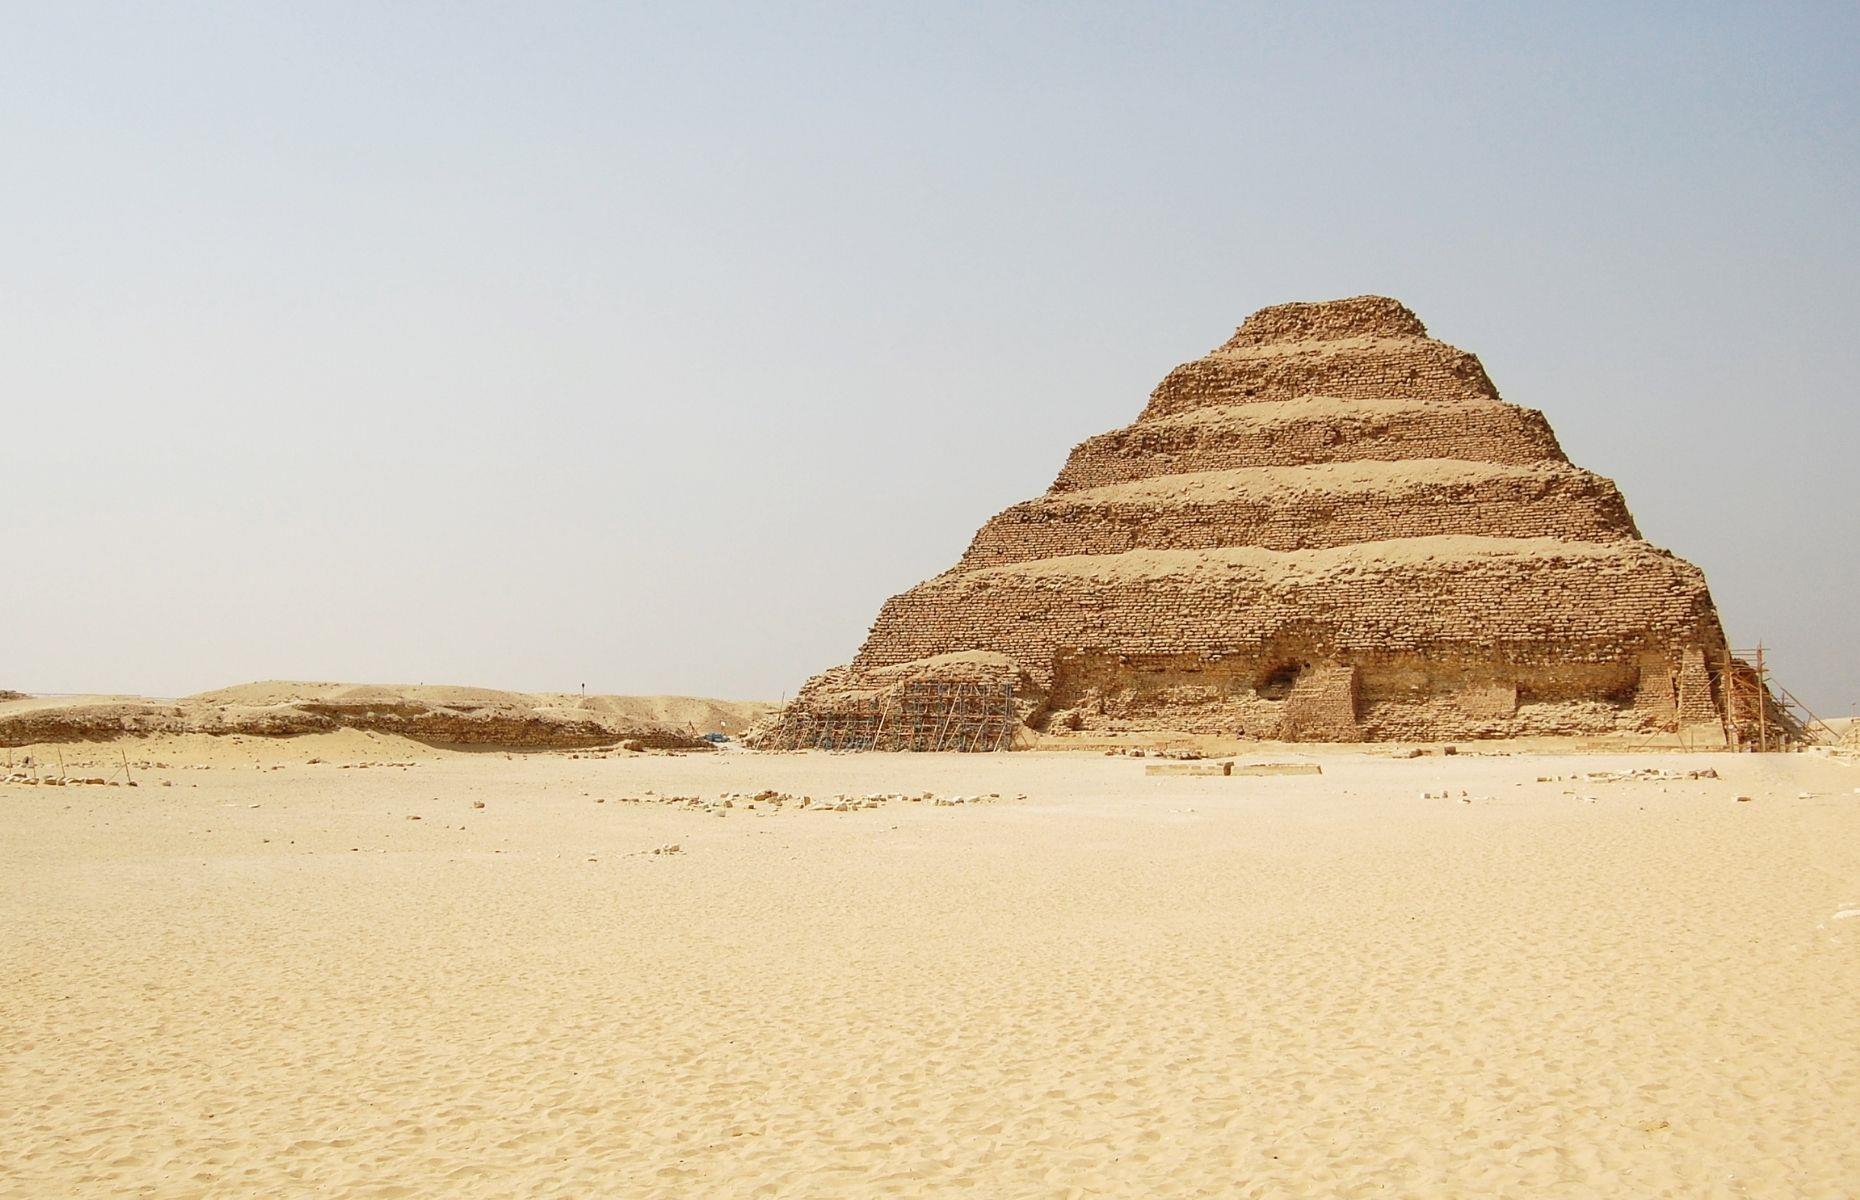 <p>Possibly Egypt’s strangest-looking pyramid, the Djoser Pyramid is located in Saqqara in the ancient capital of Memphis. Djoser (2650-2575 BC) was the first pharaoh to use stone in a pyramid’s construction – before this, royal tombs were simple rectangular monuments made from clay bricks called mastabas. The bizarre, tiered structure is the work of the architect Imhotep, who ‘stacked’ the mastabas to create this step pyramid – 204 feet (62m) high and the first of its kind.</p>